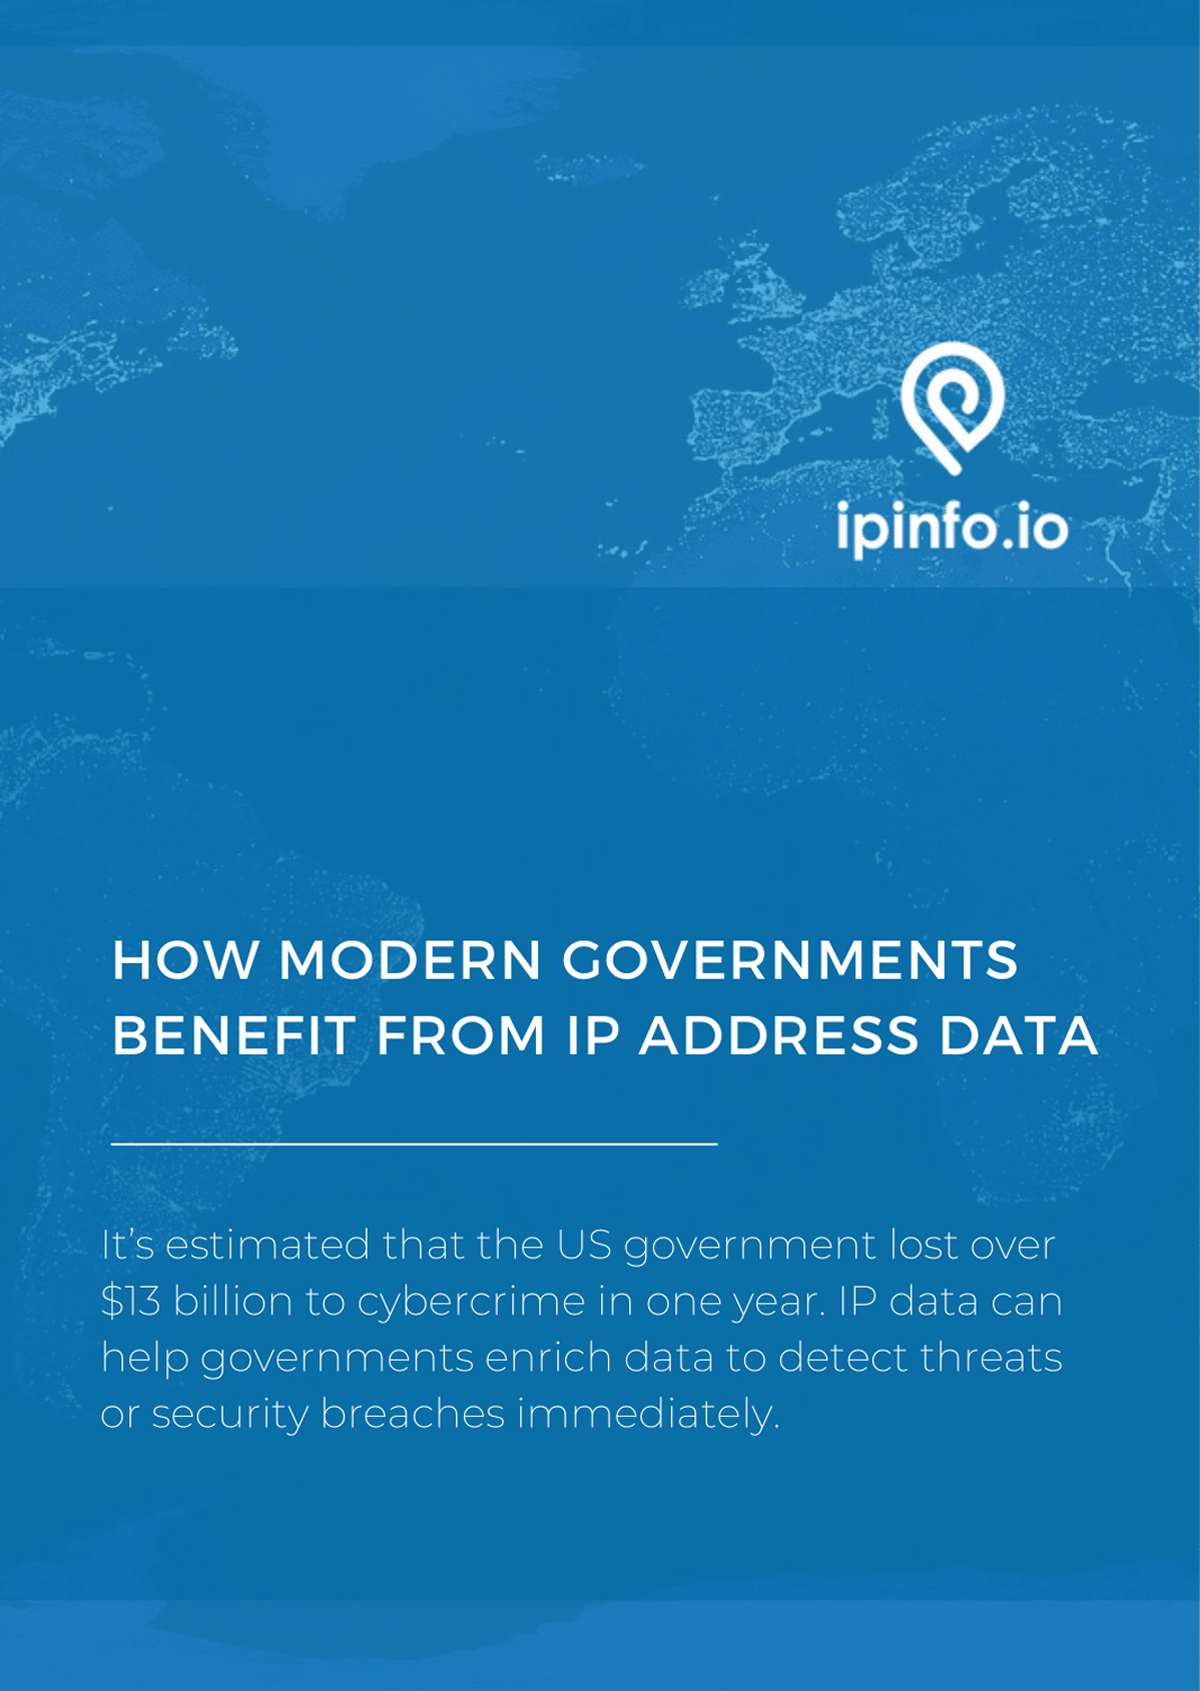 Modern Governments and IP data